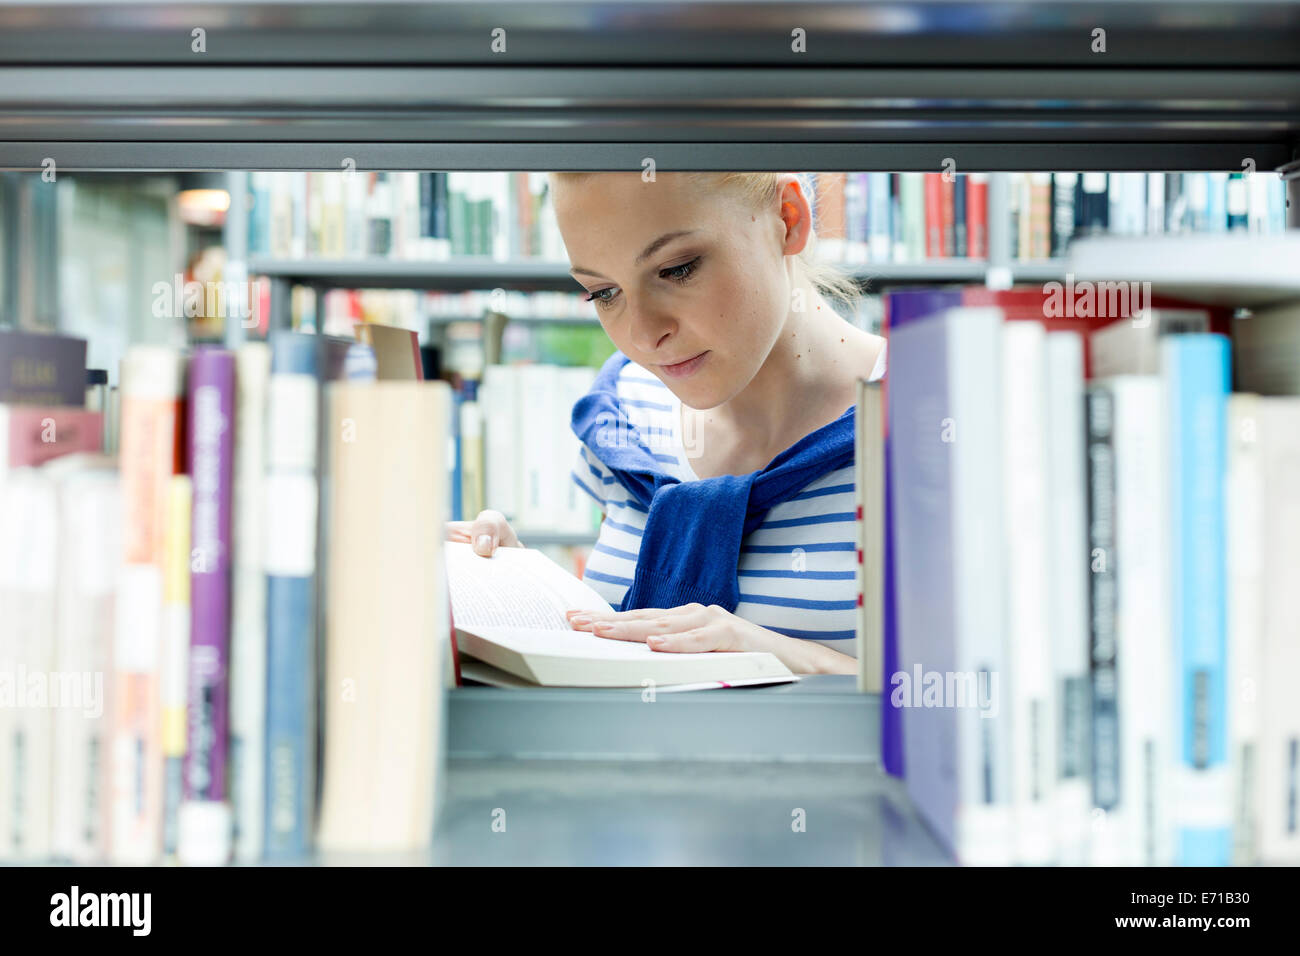 Student in a university library reading book at shelf Stock Photo